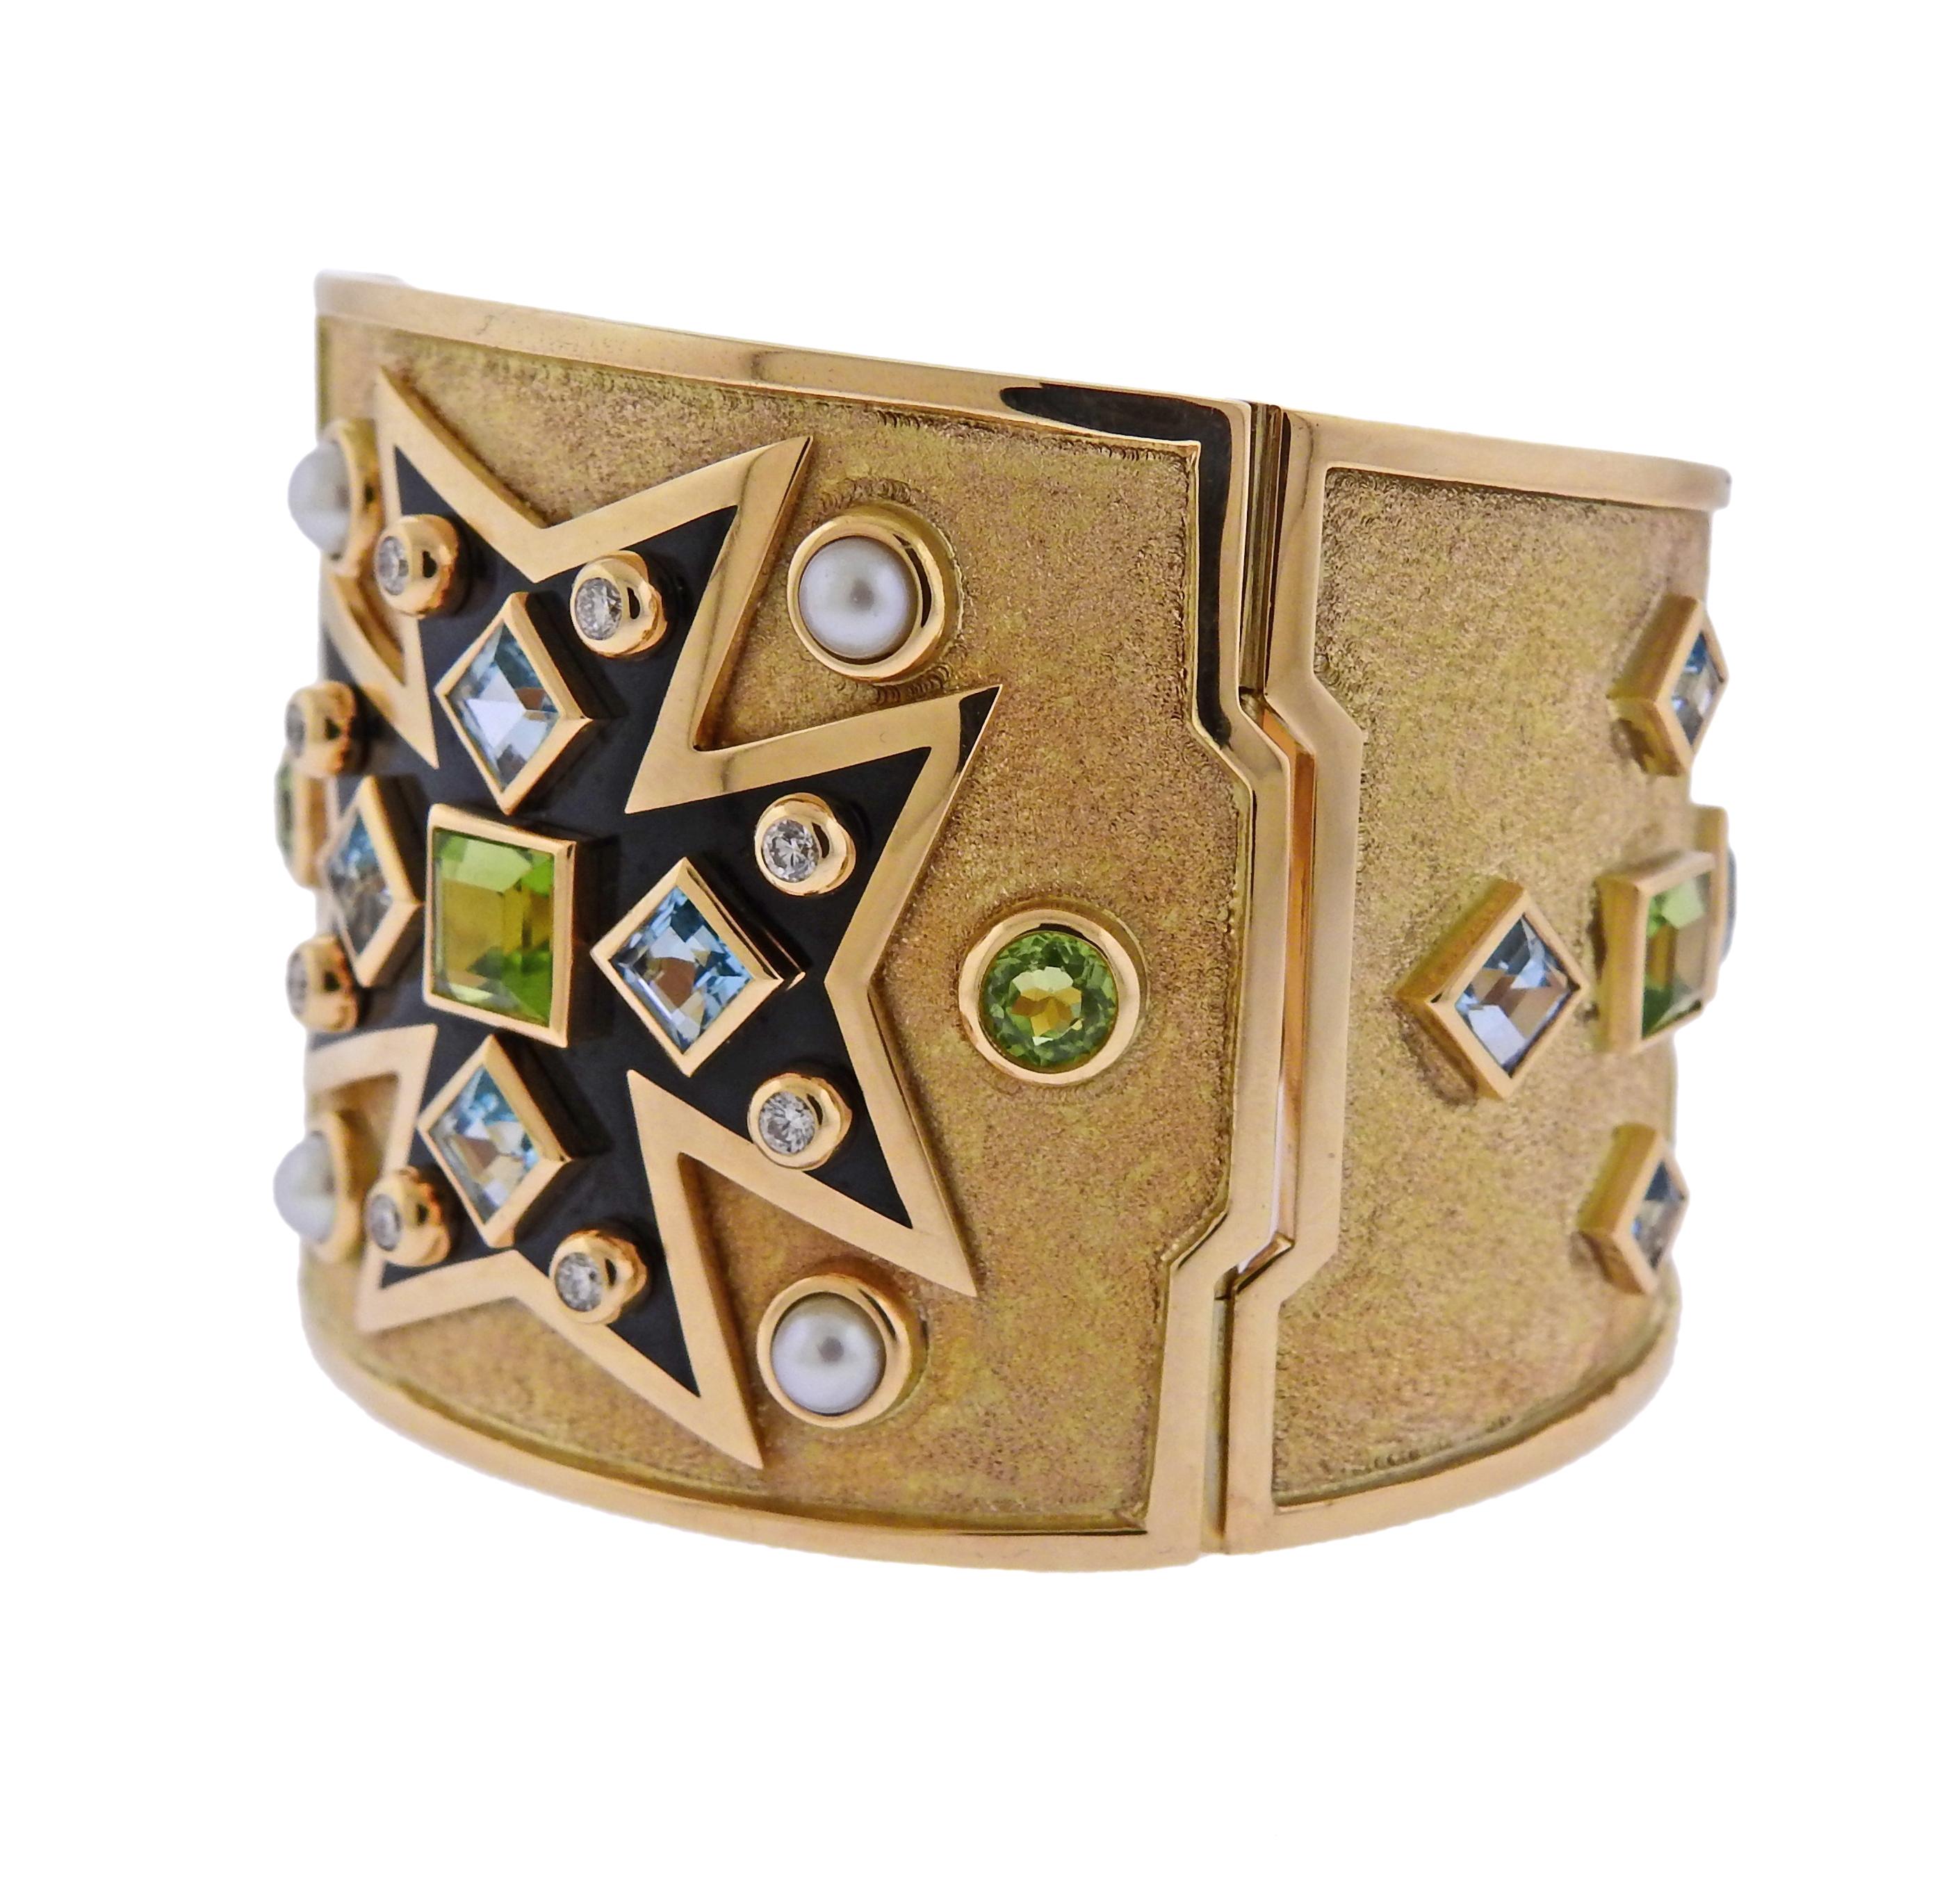 Iconic Maltese Cross bracelet, crafted by Verdura, set with multi color gemstones, pearls and approx. 0.40ctw in G/VS diamonds.  Bracelet will fit approx. 7